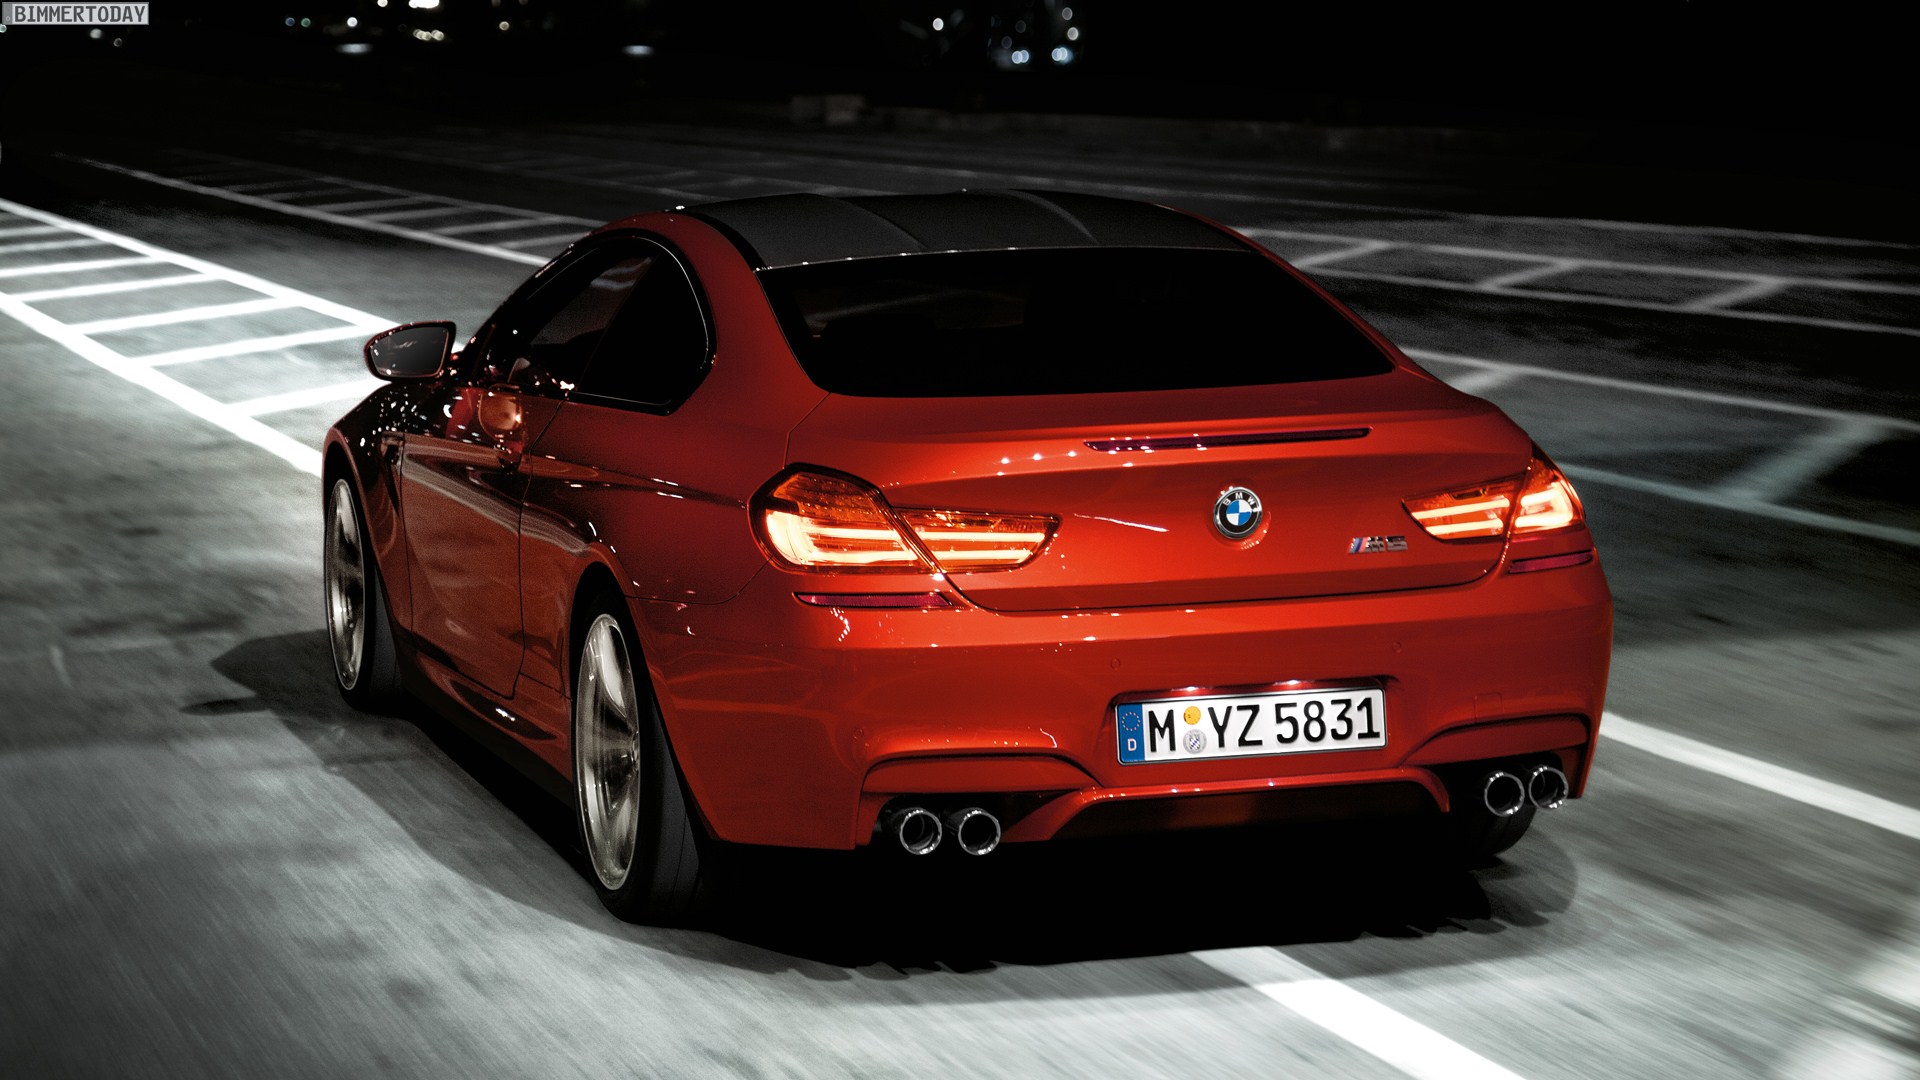 Free download BMW M6 Coupe Wallpaper 13 1920 X 1080 stmednet [1920x1080]  for your Desktop, Mobile & Tablet | Explore 33+ BMW M6 Wallpapers | Bmw M3  Wallpapers, M6 Wallpaper, Bmw E30 Wallpaper